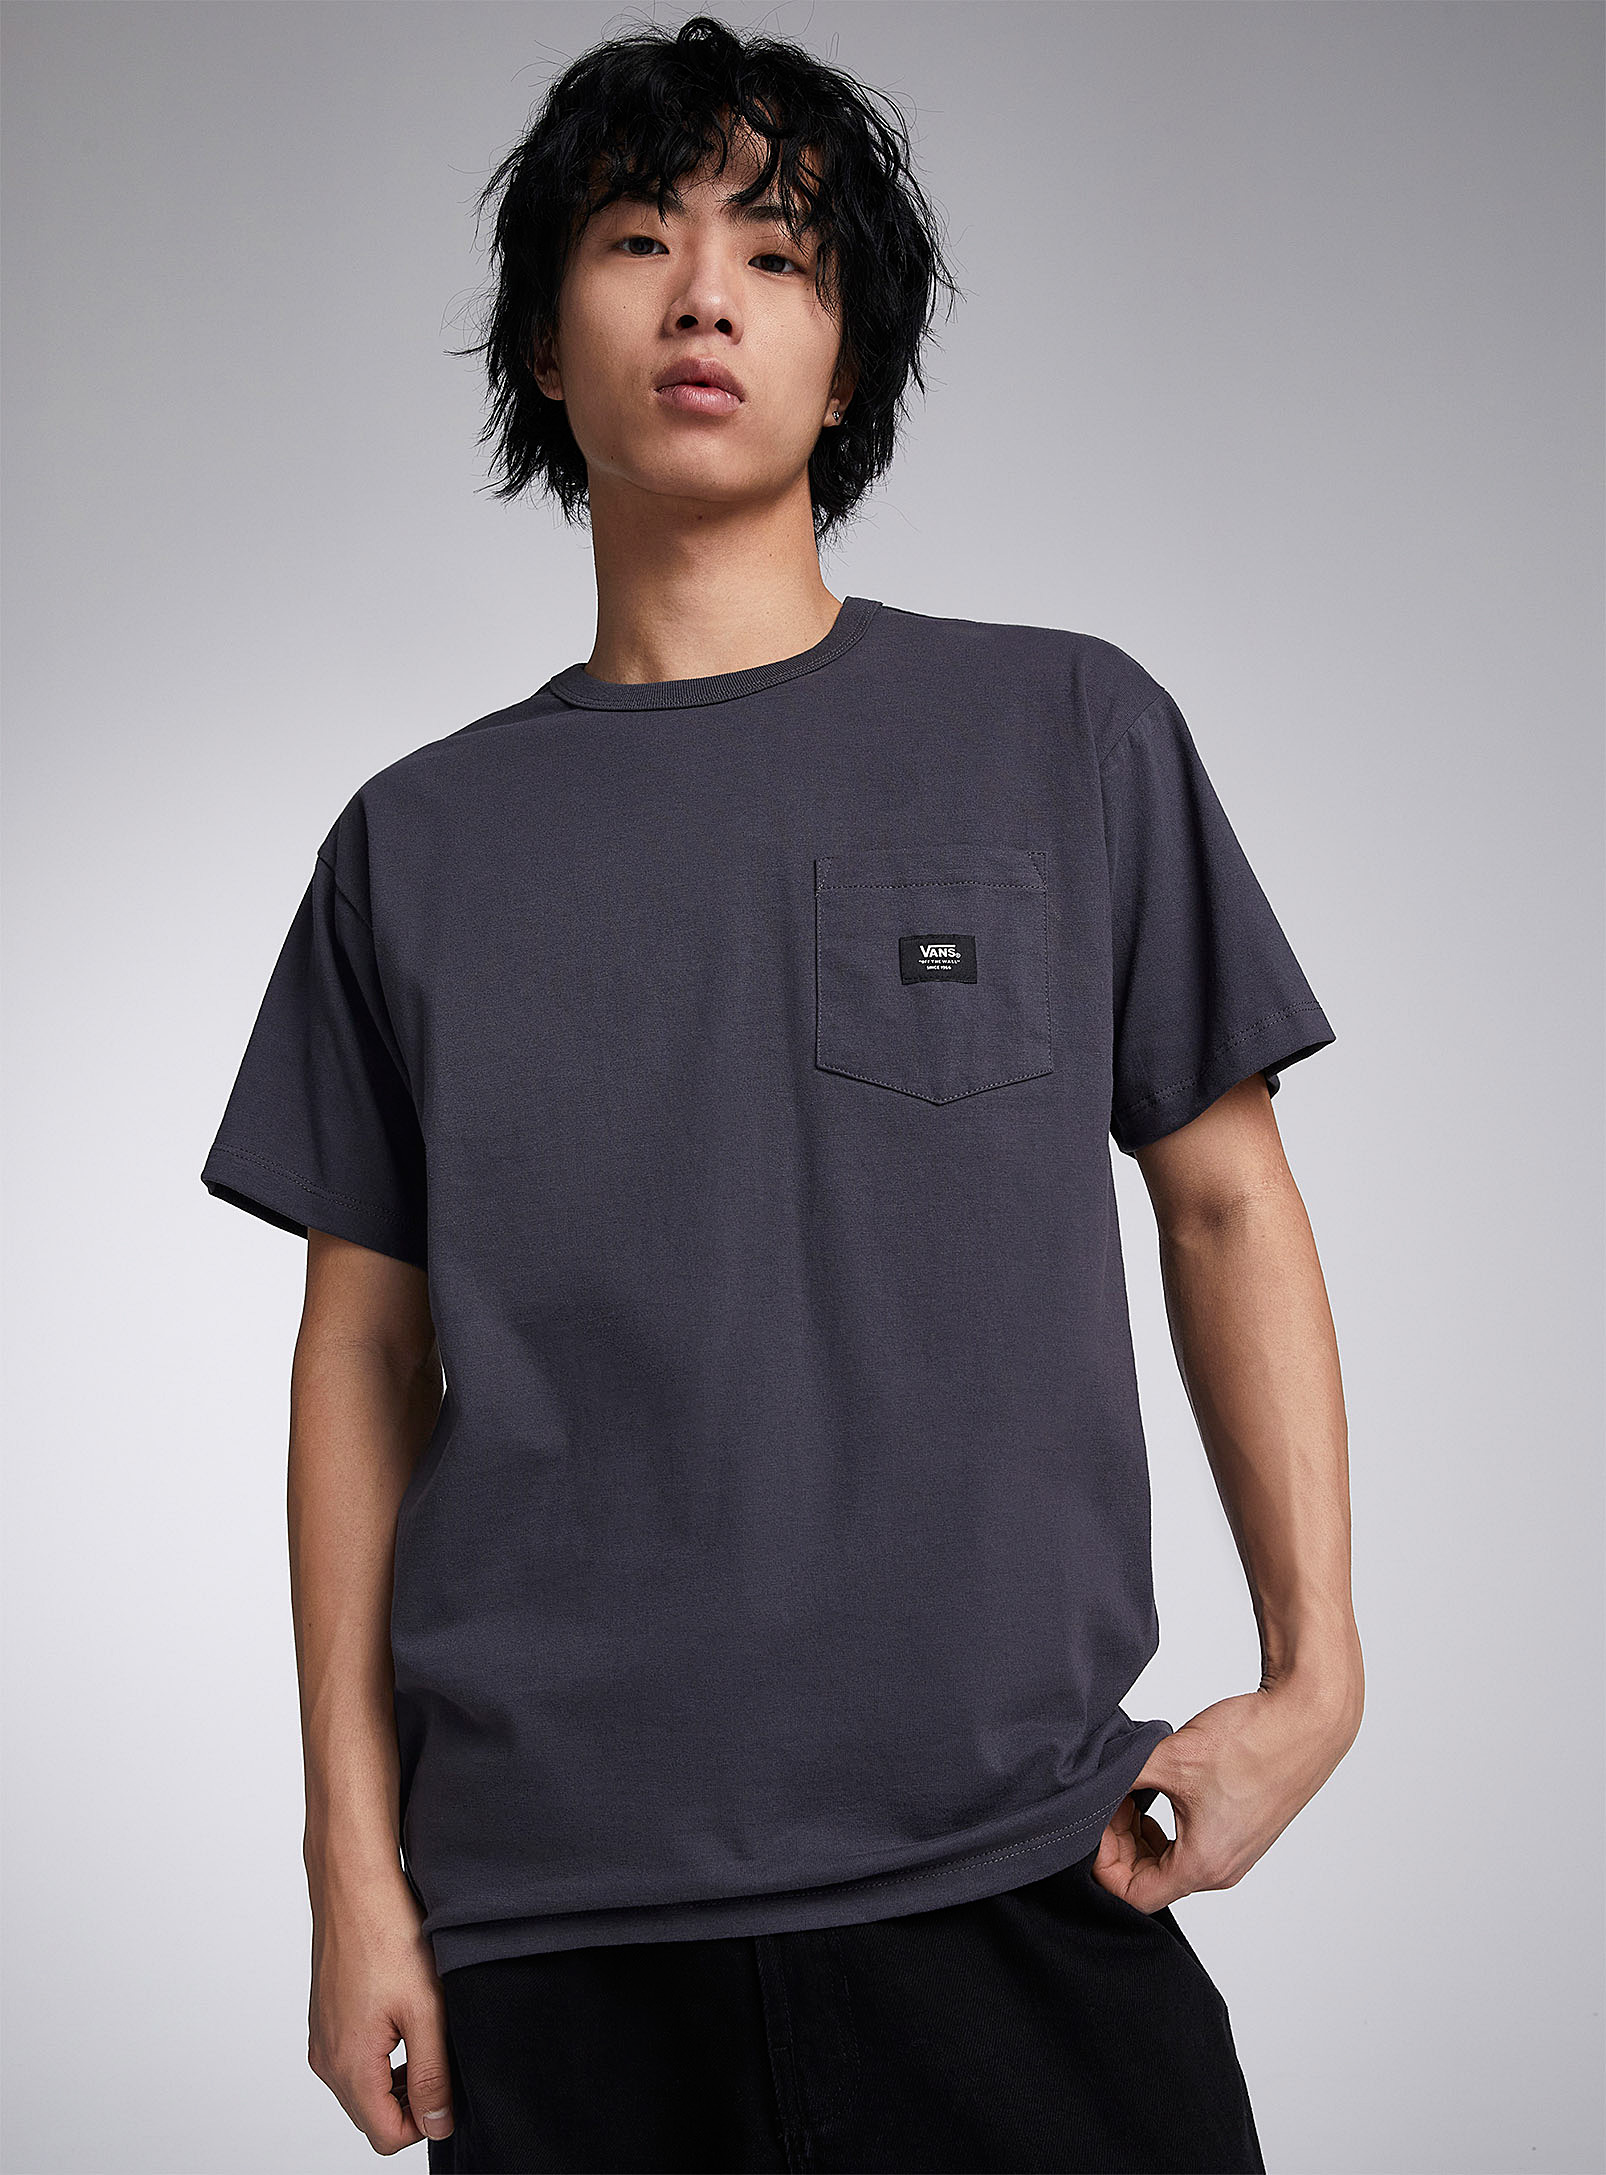 Vans Woven Patch Pocket T-shirt In Charcoal